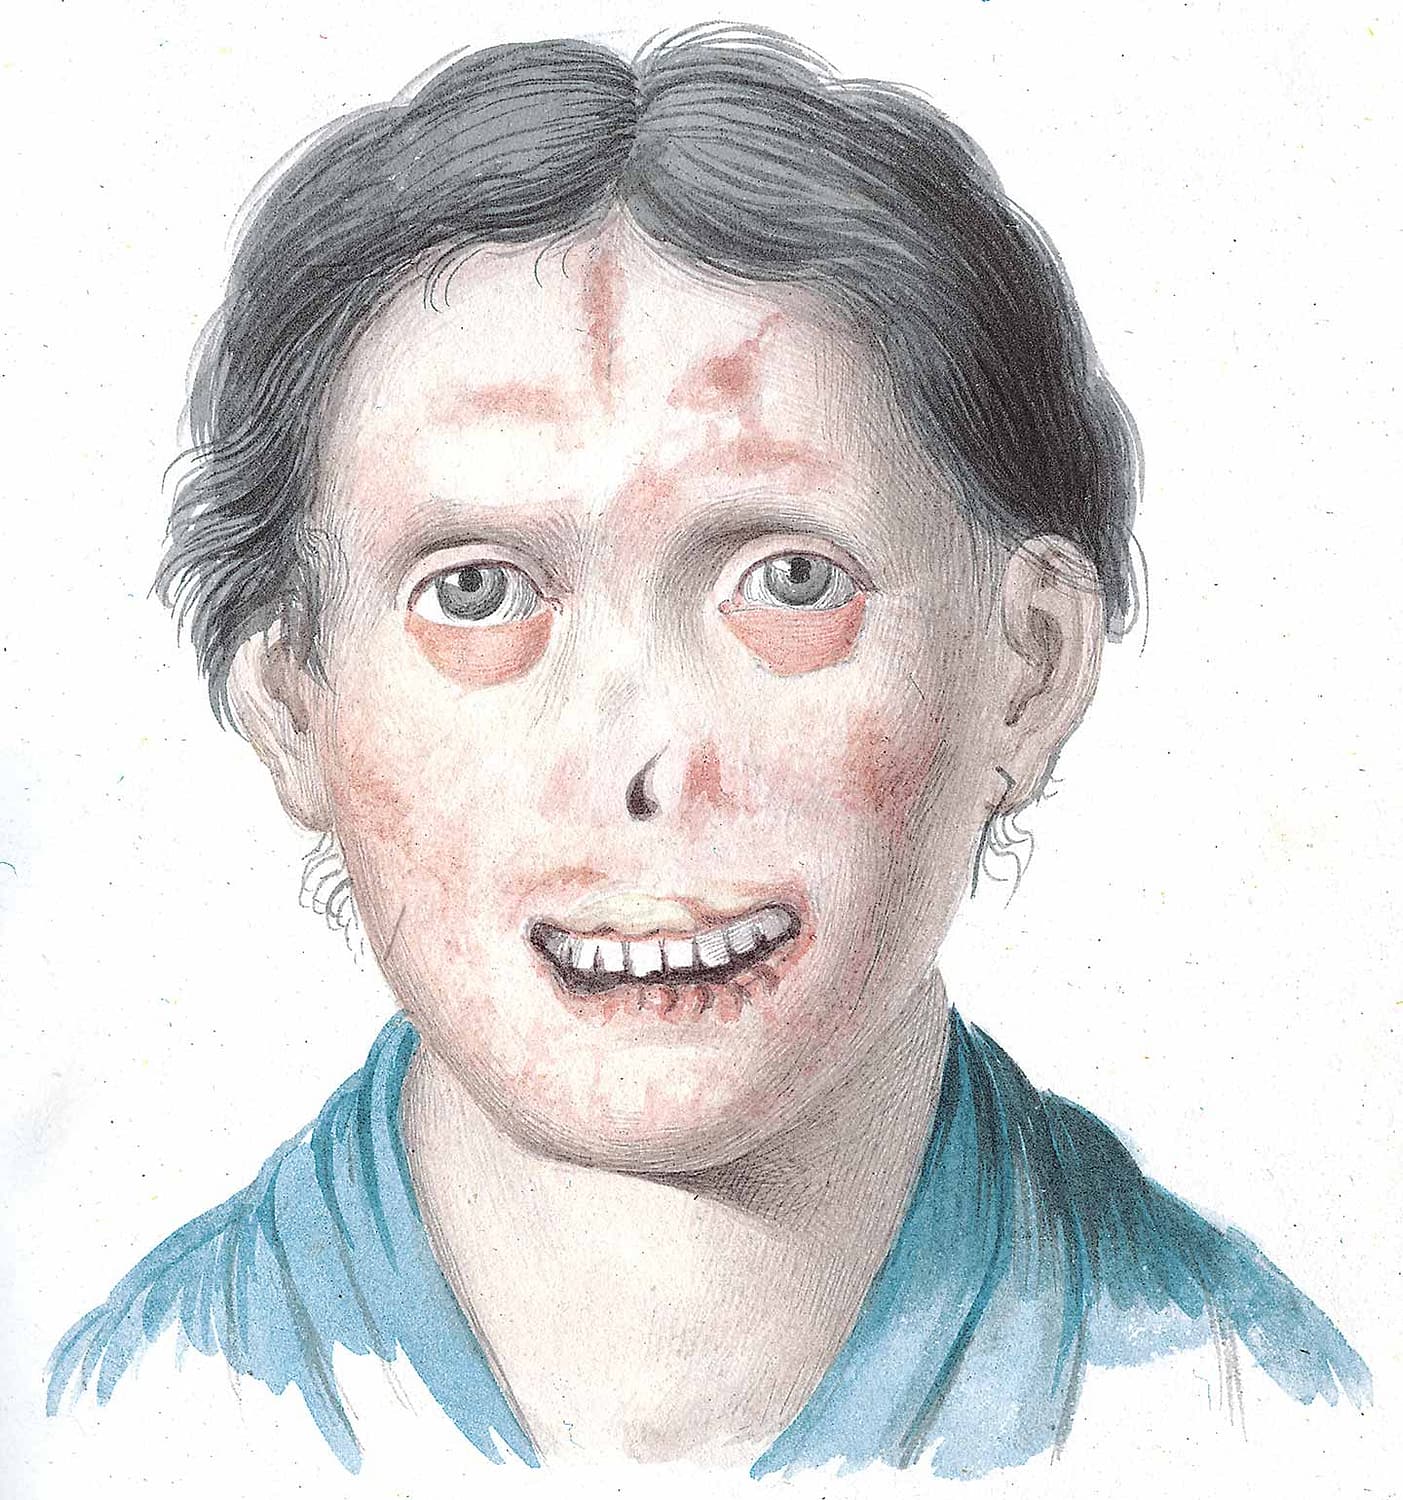 Woman with facial lesions.